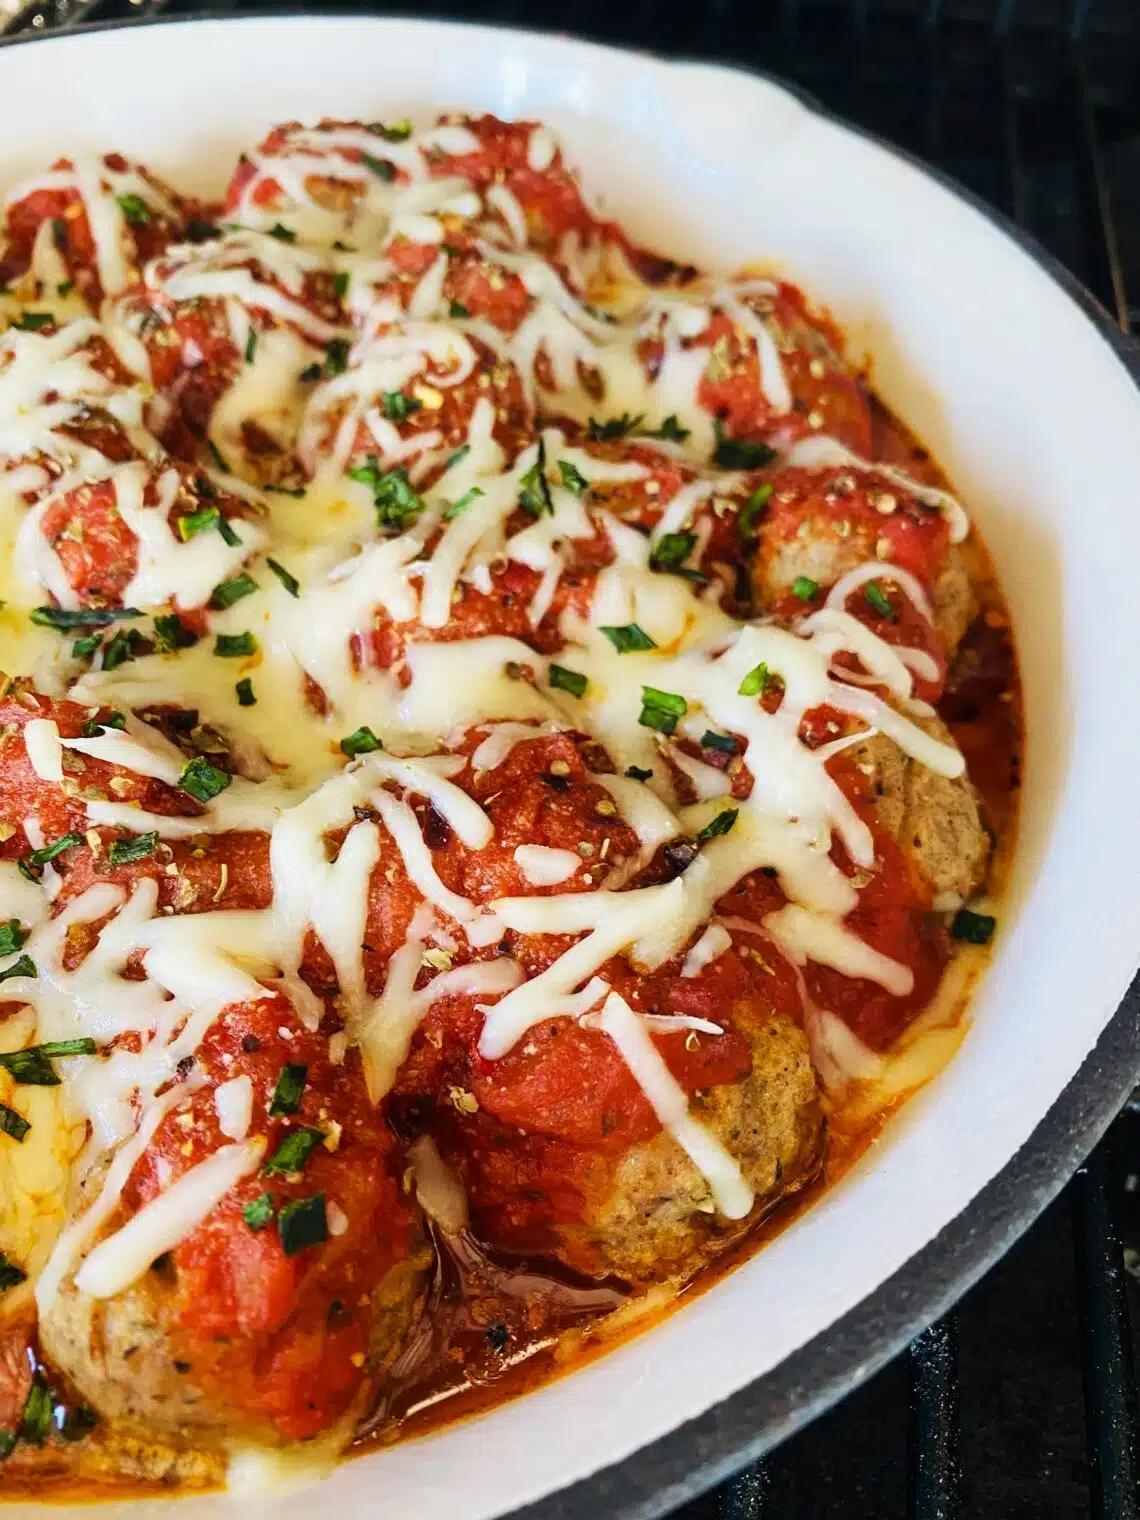 smoked turkey meatballs - How do you know when Turkey Meatballs are done